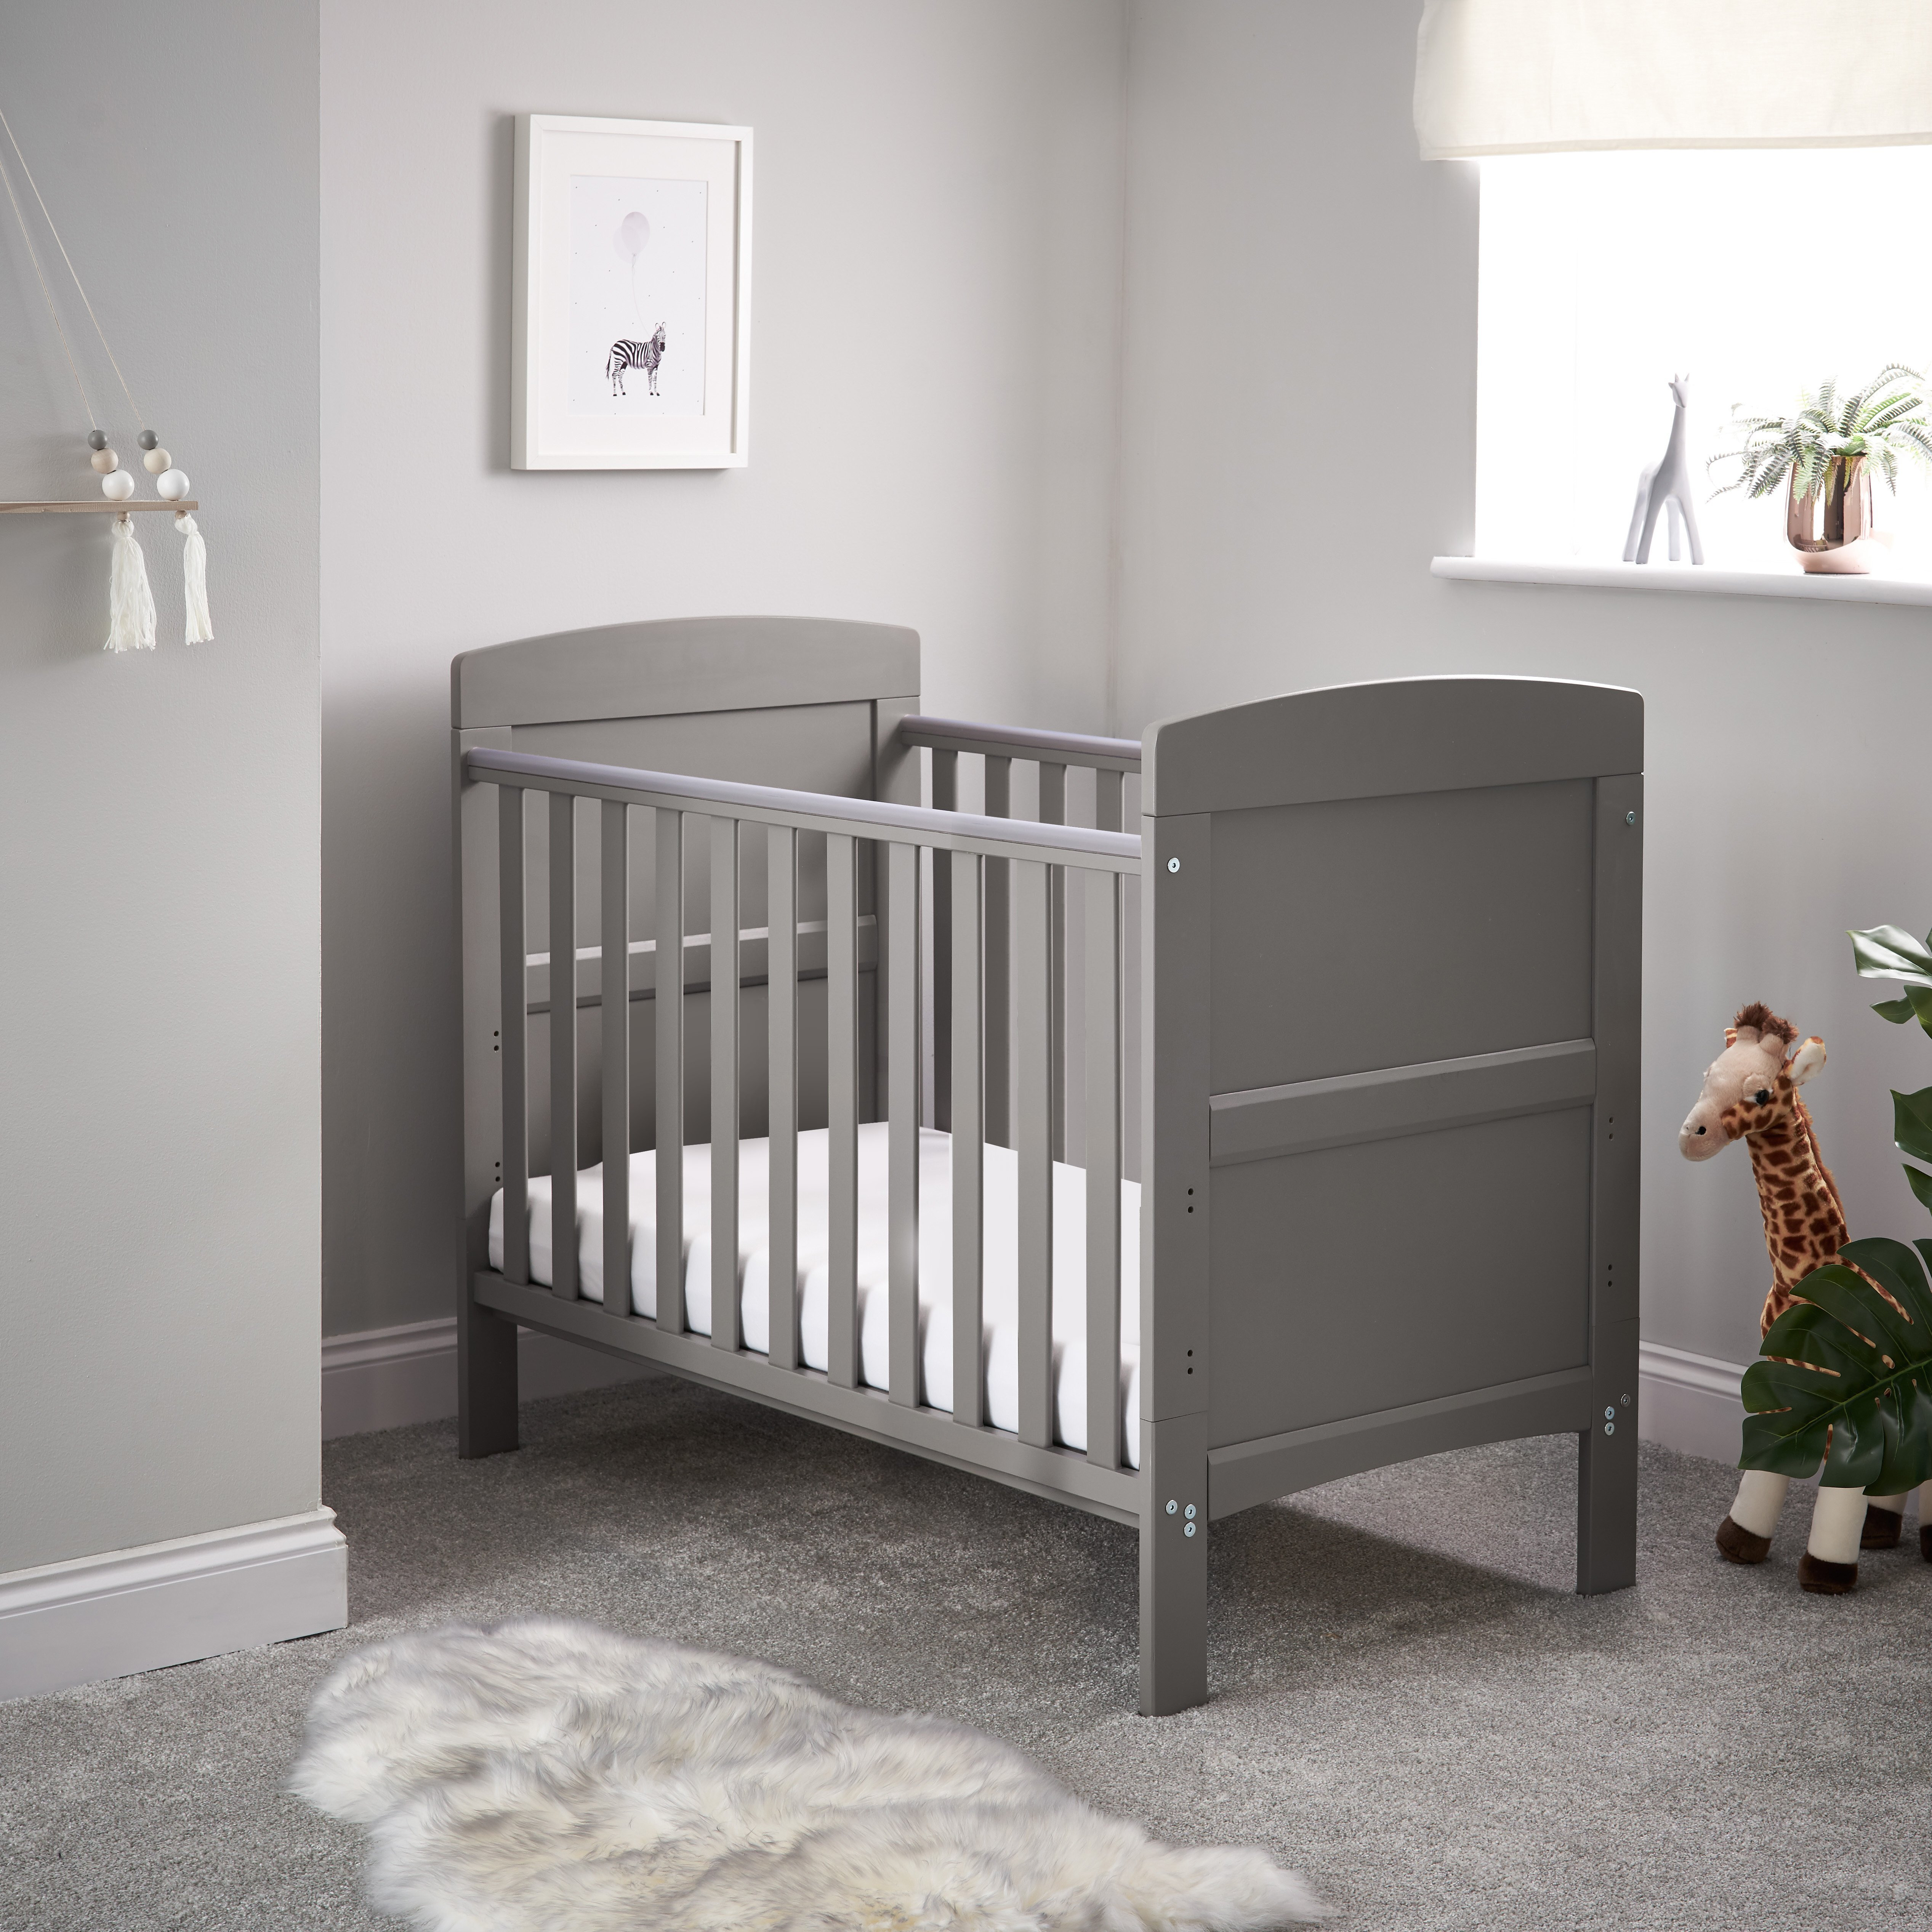 Obaby Grace Mini Baby Cot Bed - Taupe Grey - image 1